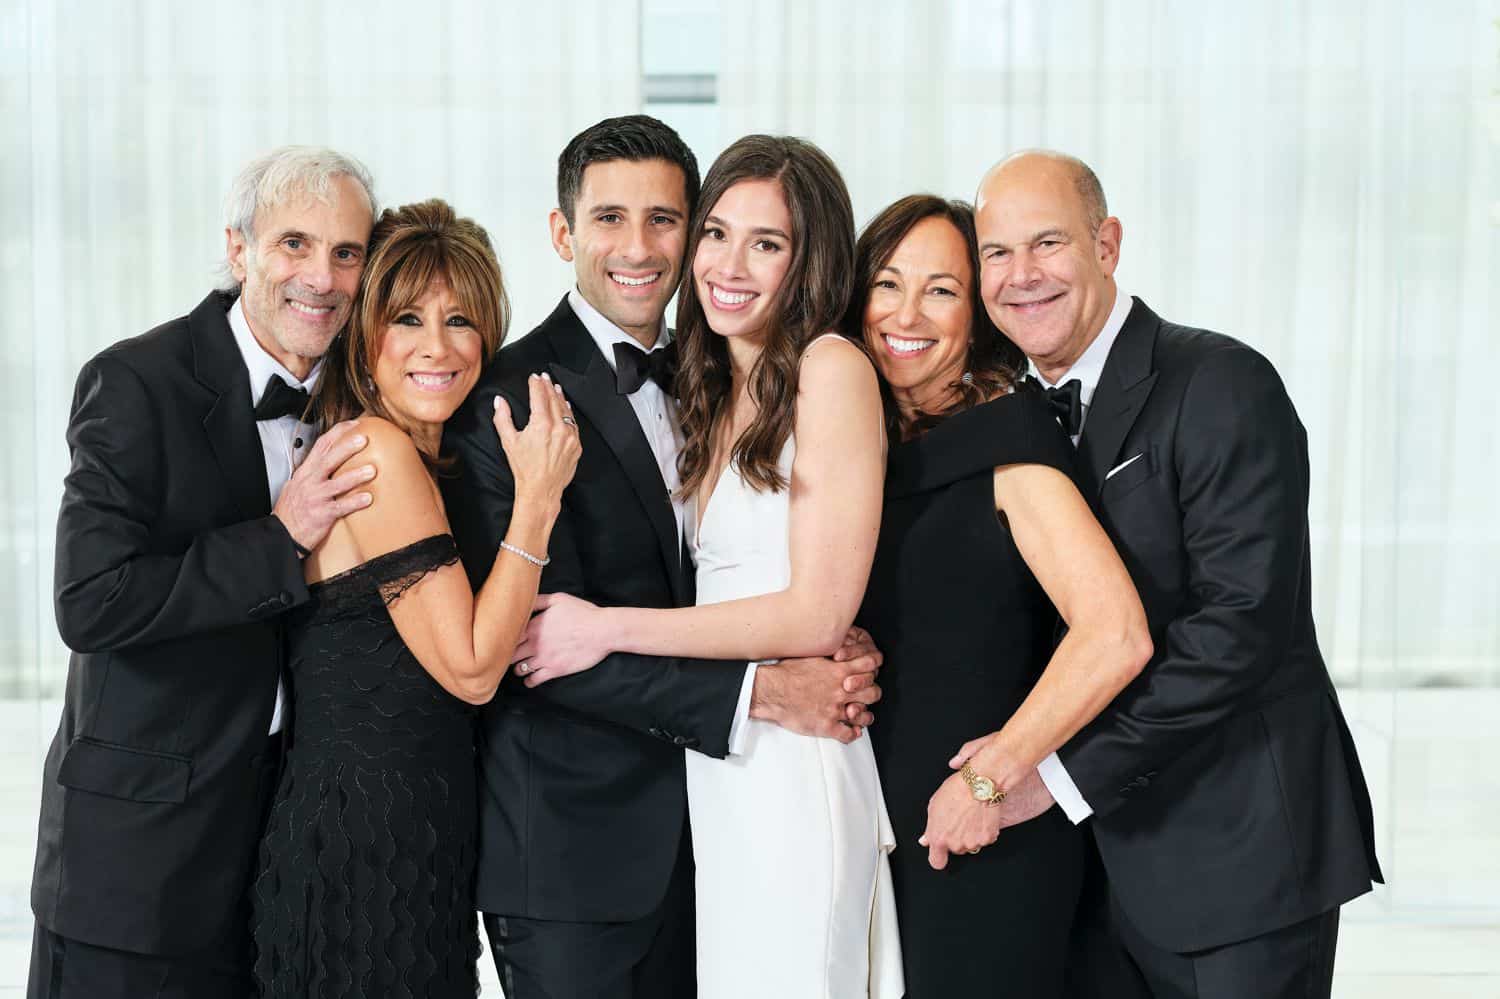 Family hugs close for a portrait at a wedding